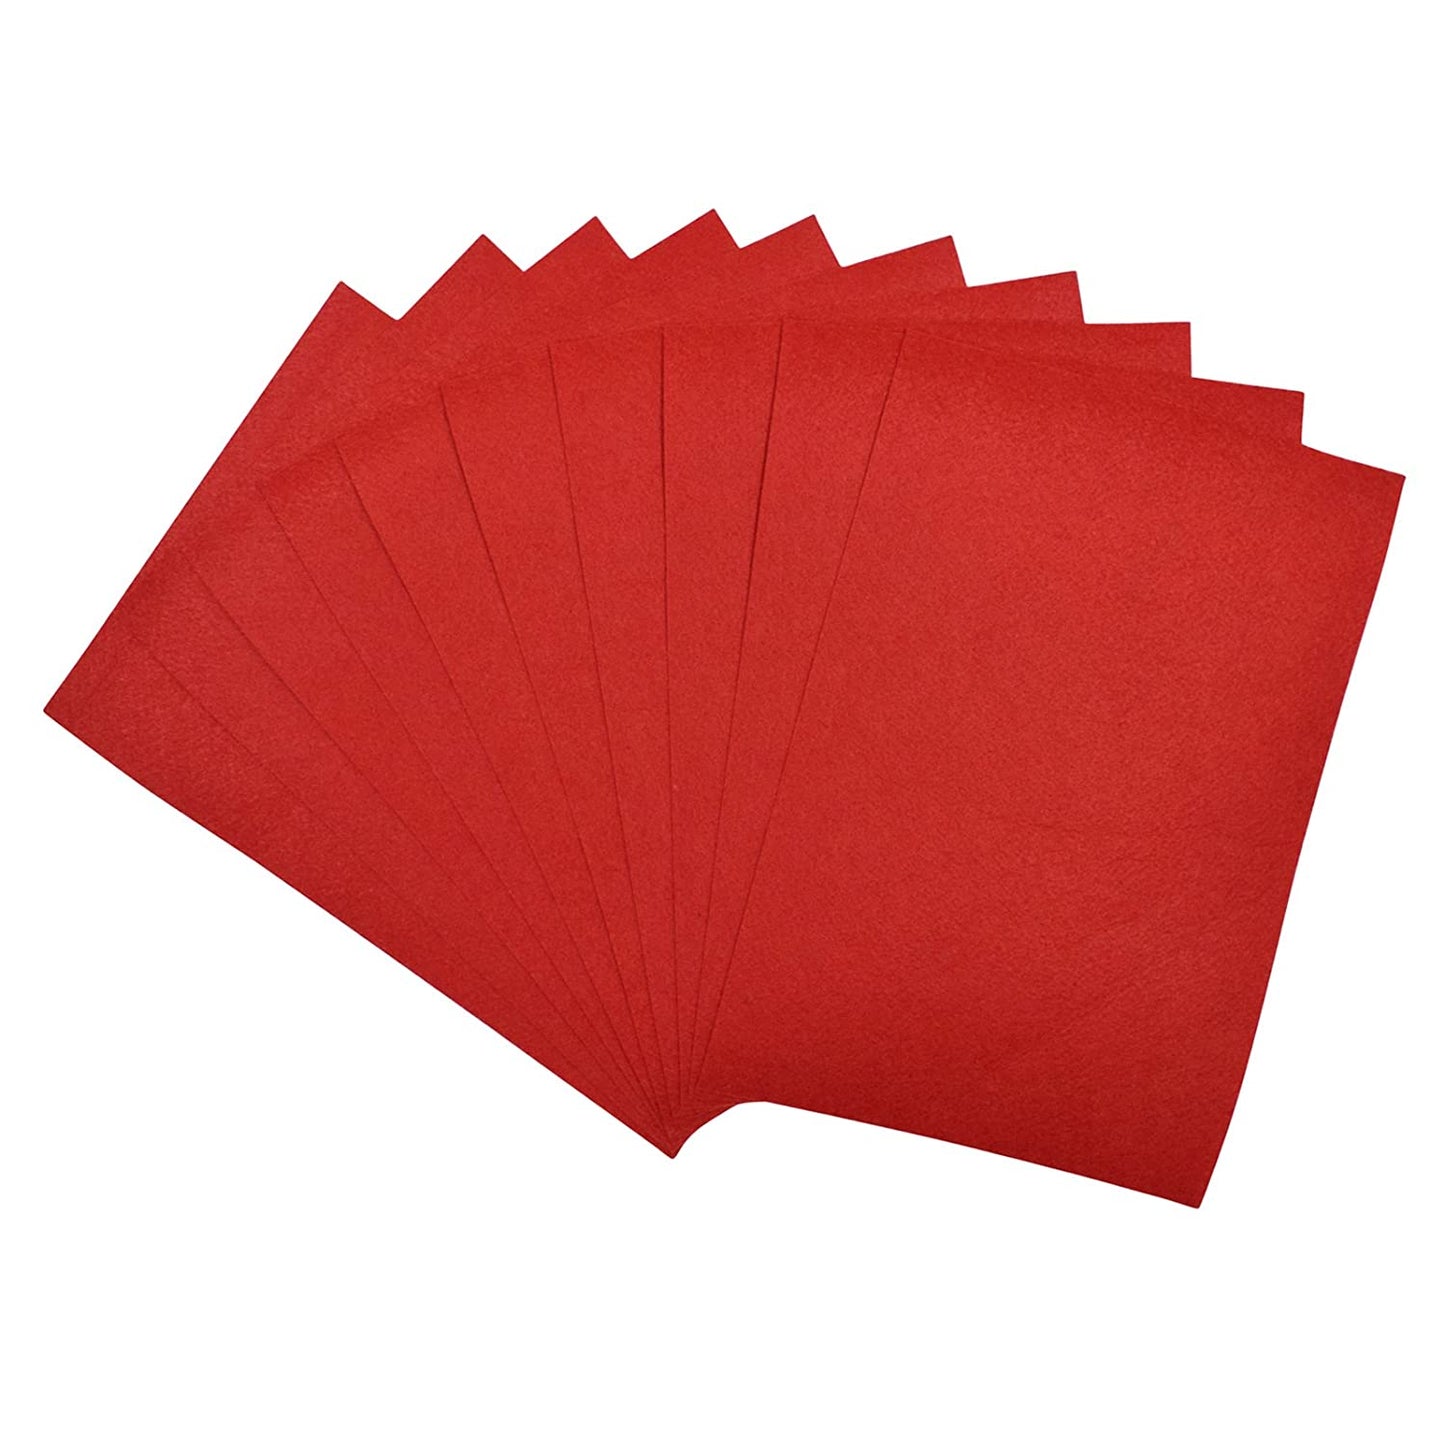 Crafting Felt Sheets A4 Size Pack of 10